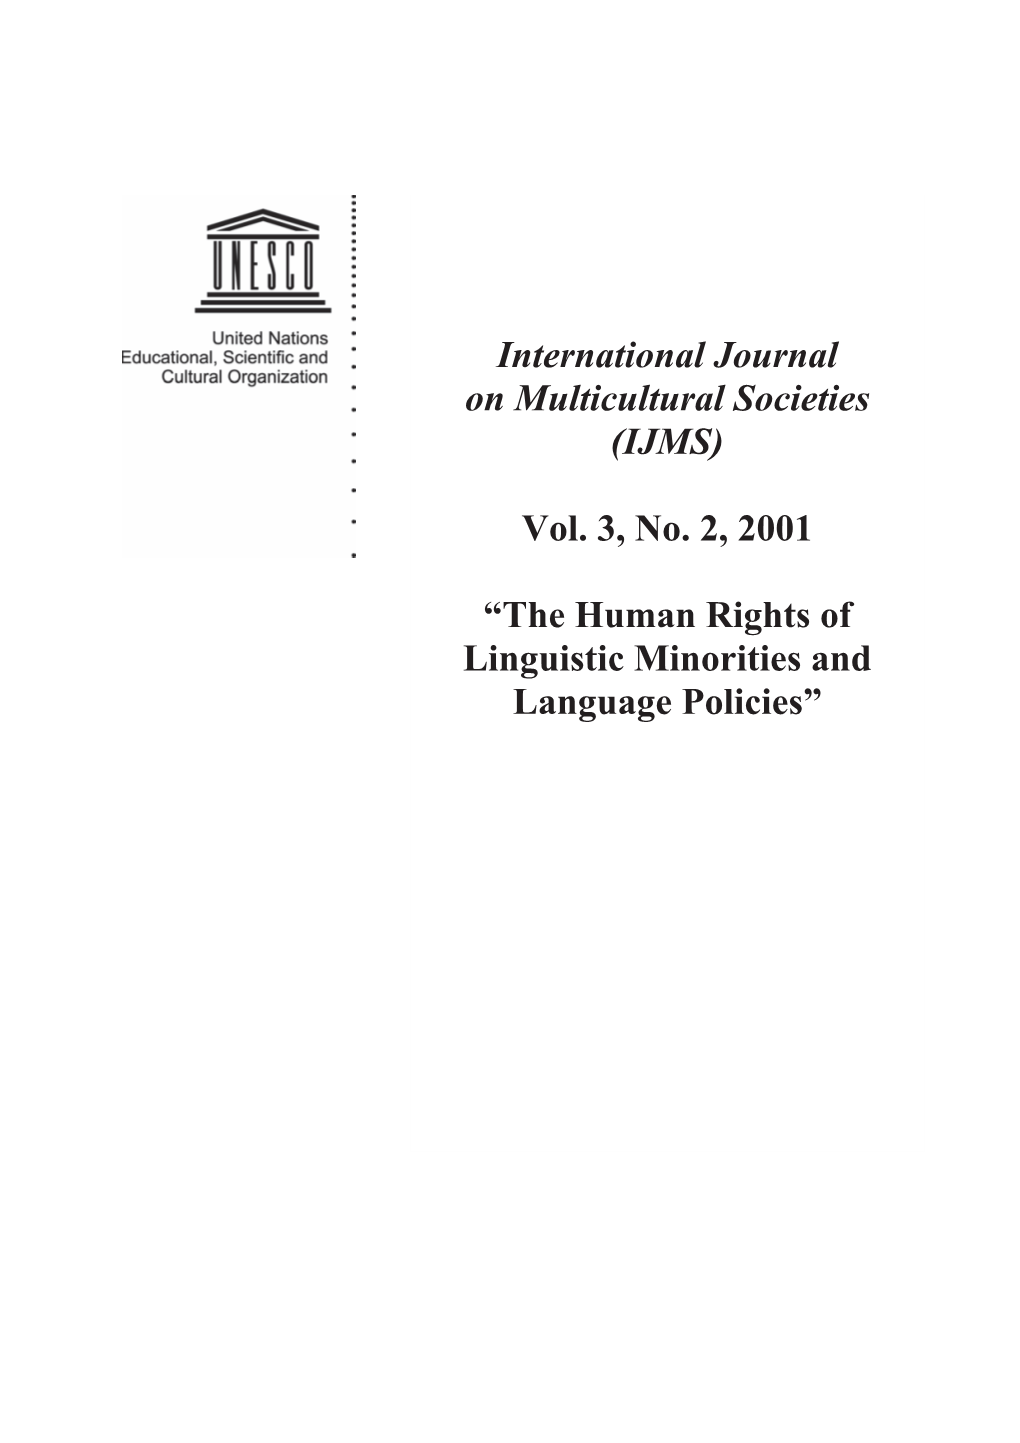 Vol. 3, No. 2, 2001 “The Human Rights of Linguistic Minorities And